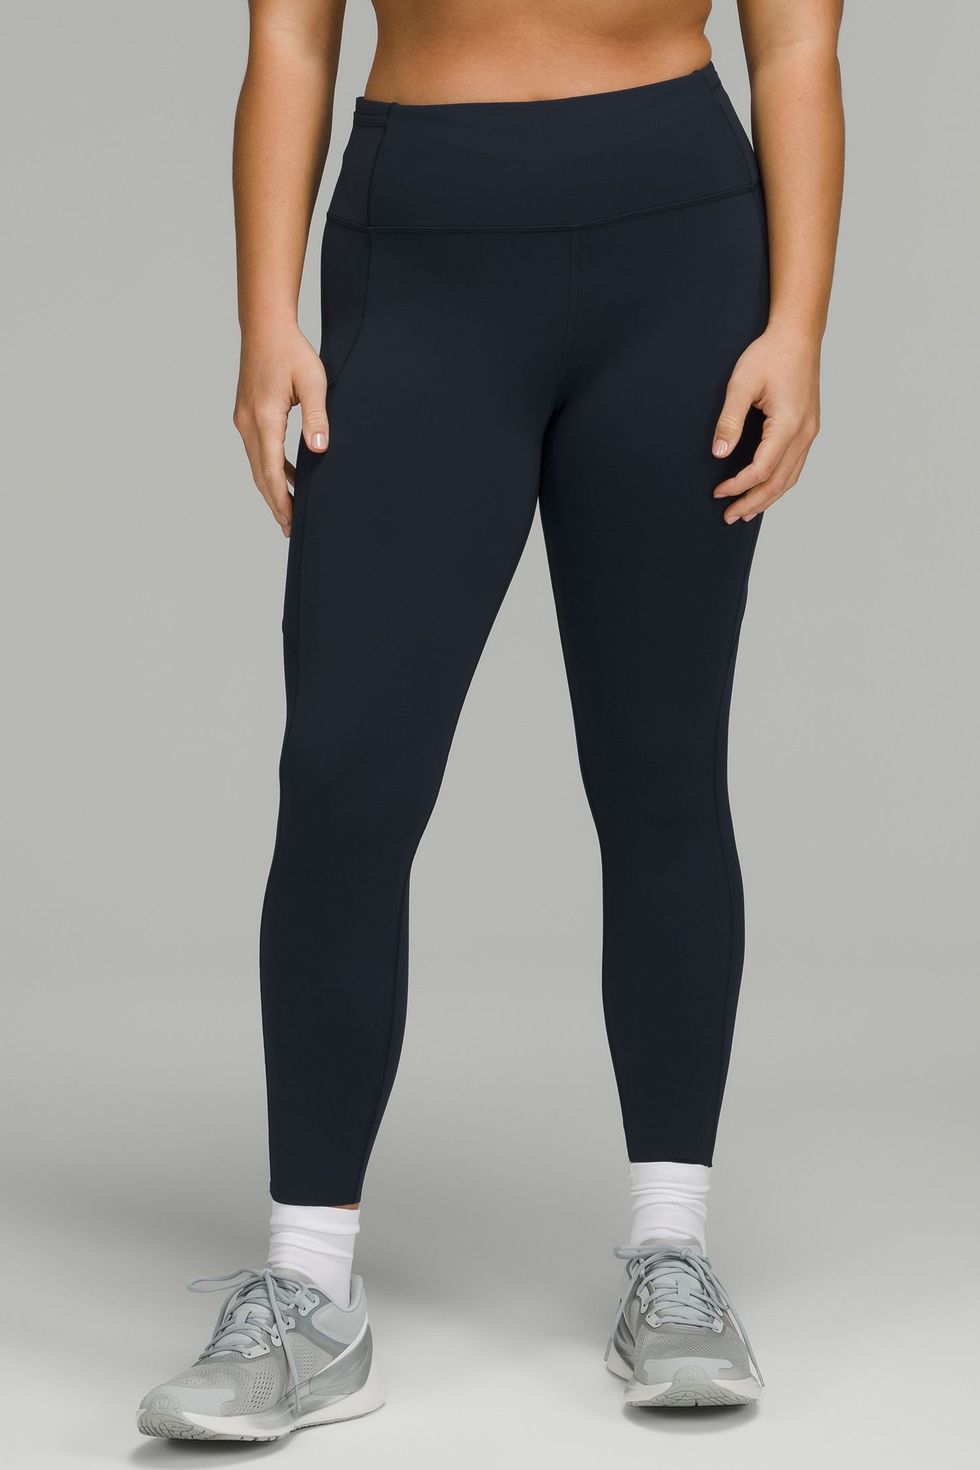 Best Nwot Lululemon Leggings - Size 10 for sale in Victoria, British  Columbia for 2024